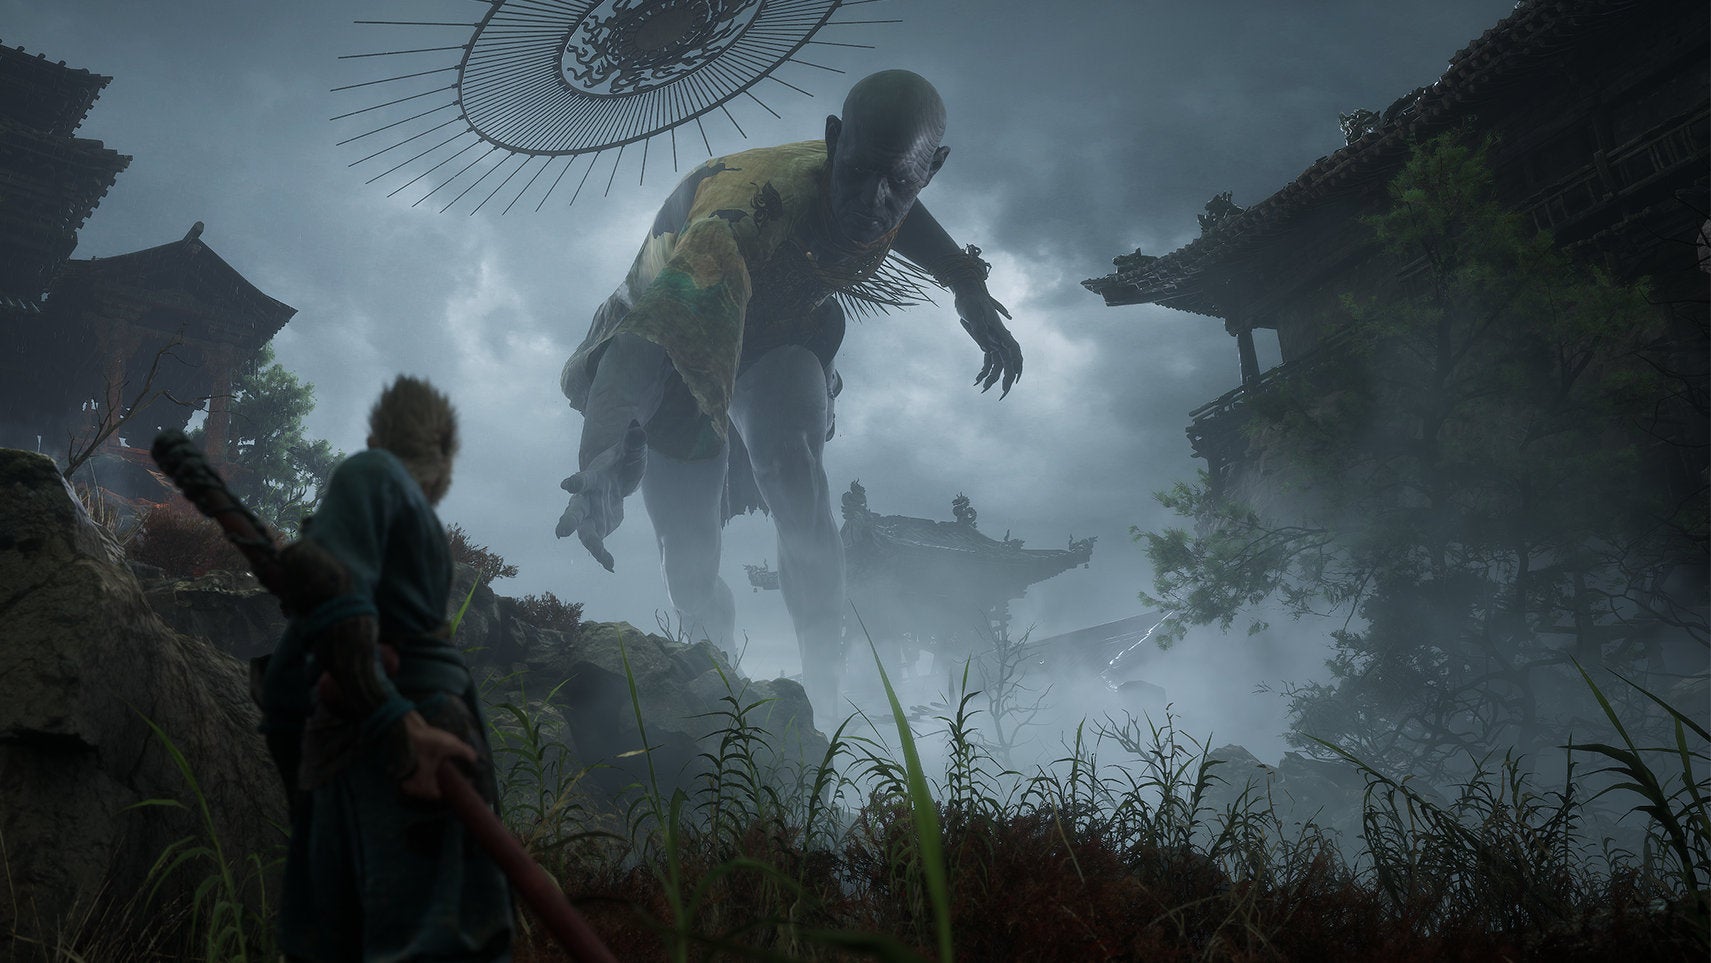 Black Myth: Wukong still has beautiful rat fights in his second trailer